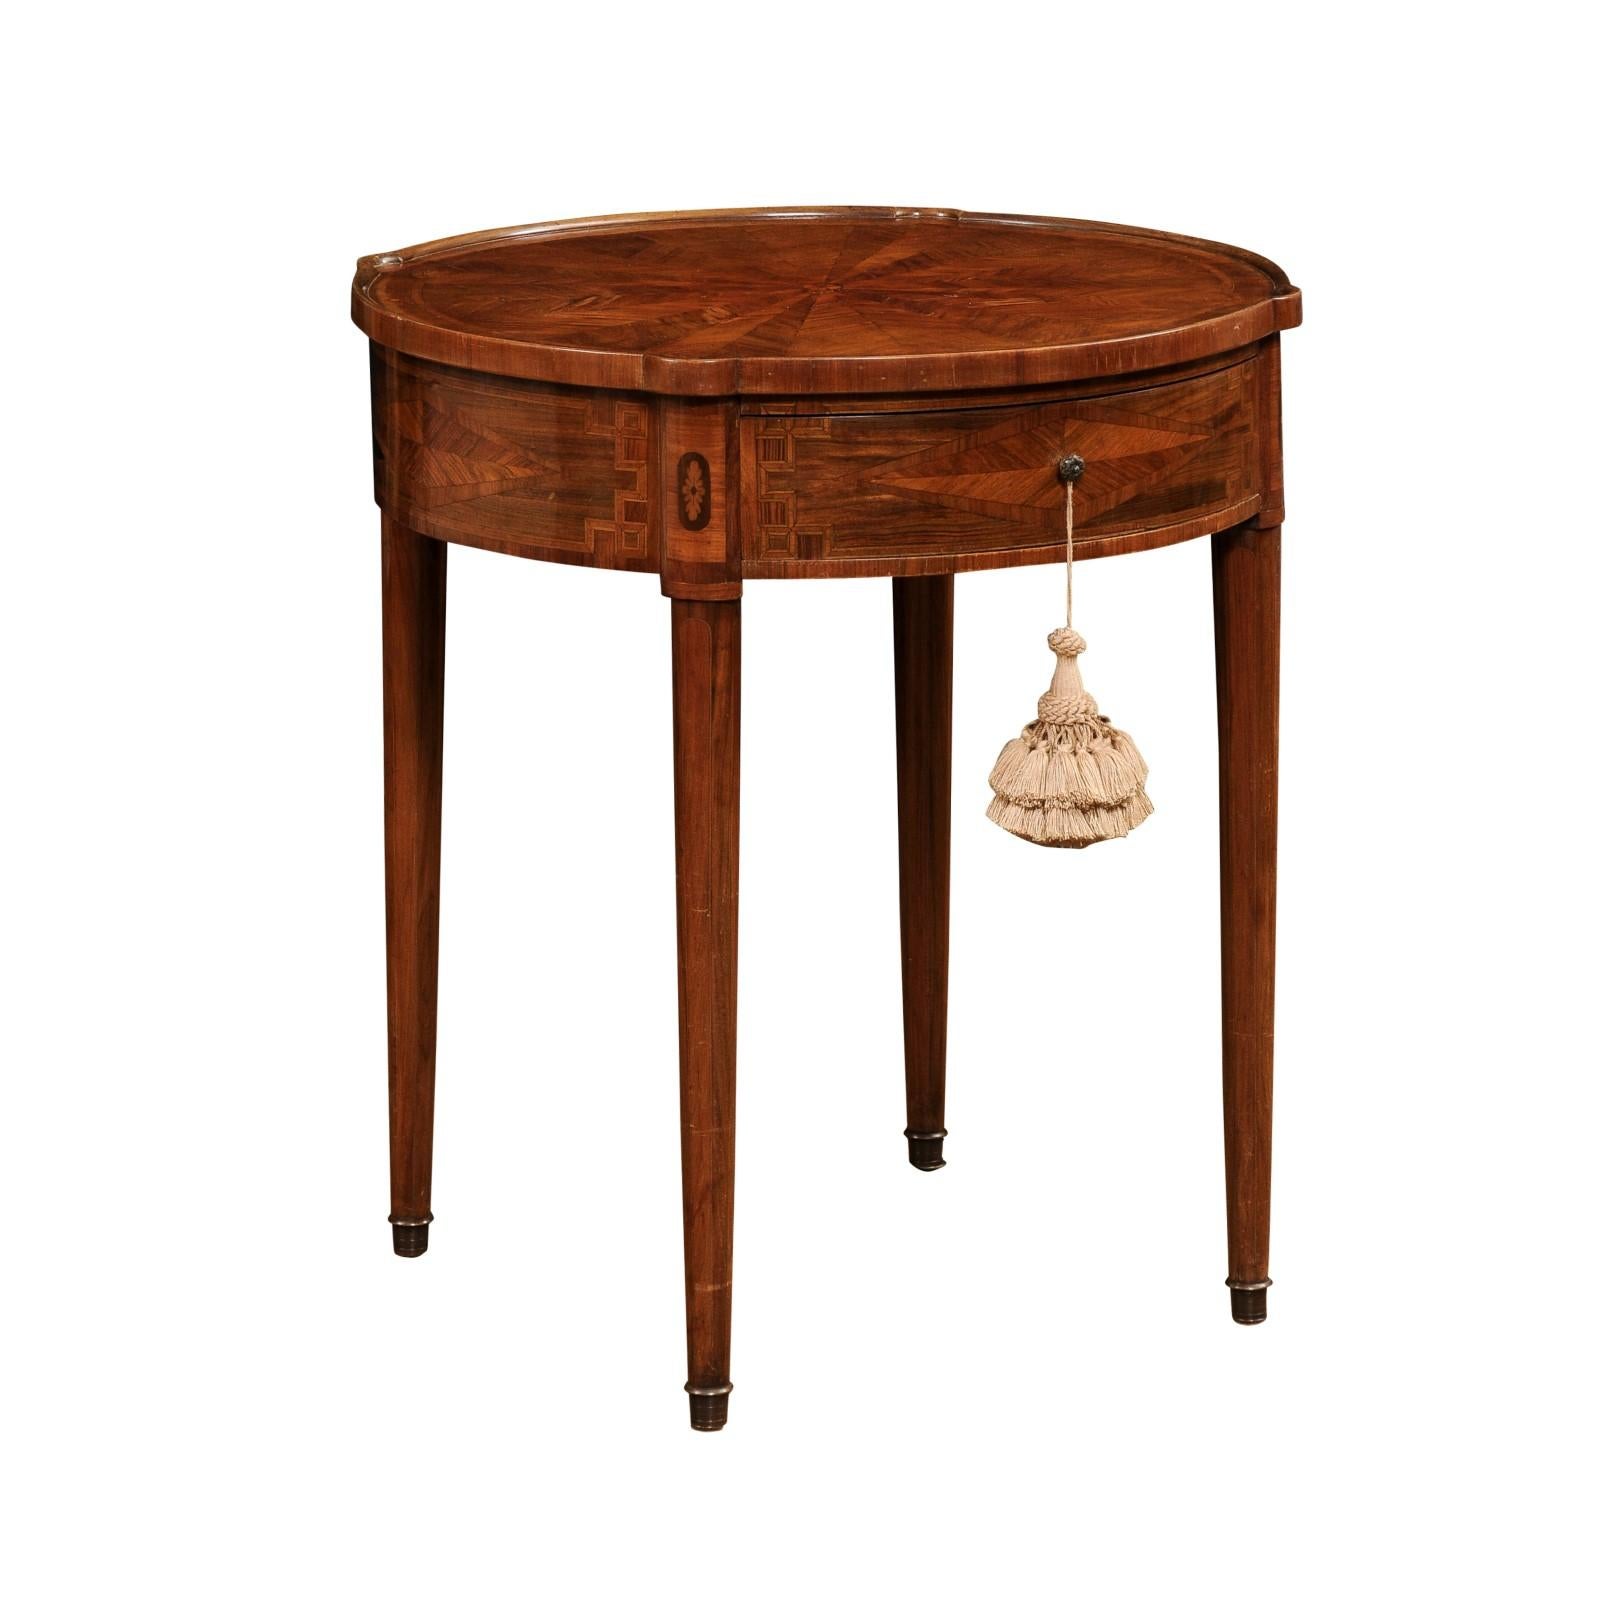 An Italian Neoclassical style mahogany and walnut center table from the 19th century with marquetry décor, round top, single drawer and cylindrical tapering legs. Created in Italy during the 19th century, this center table captures our attention